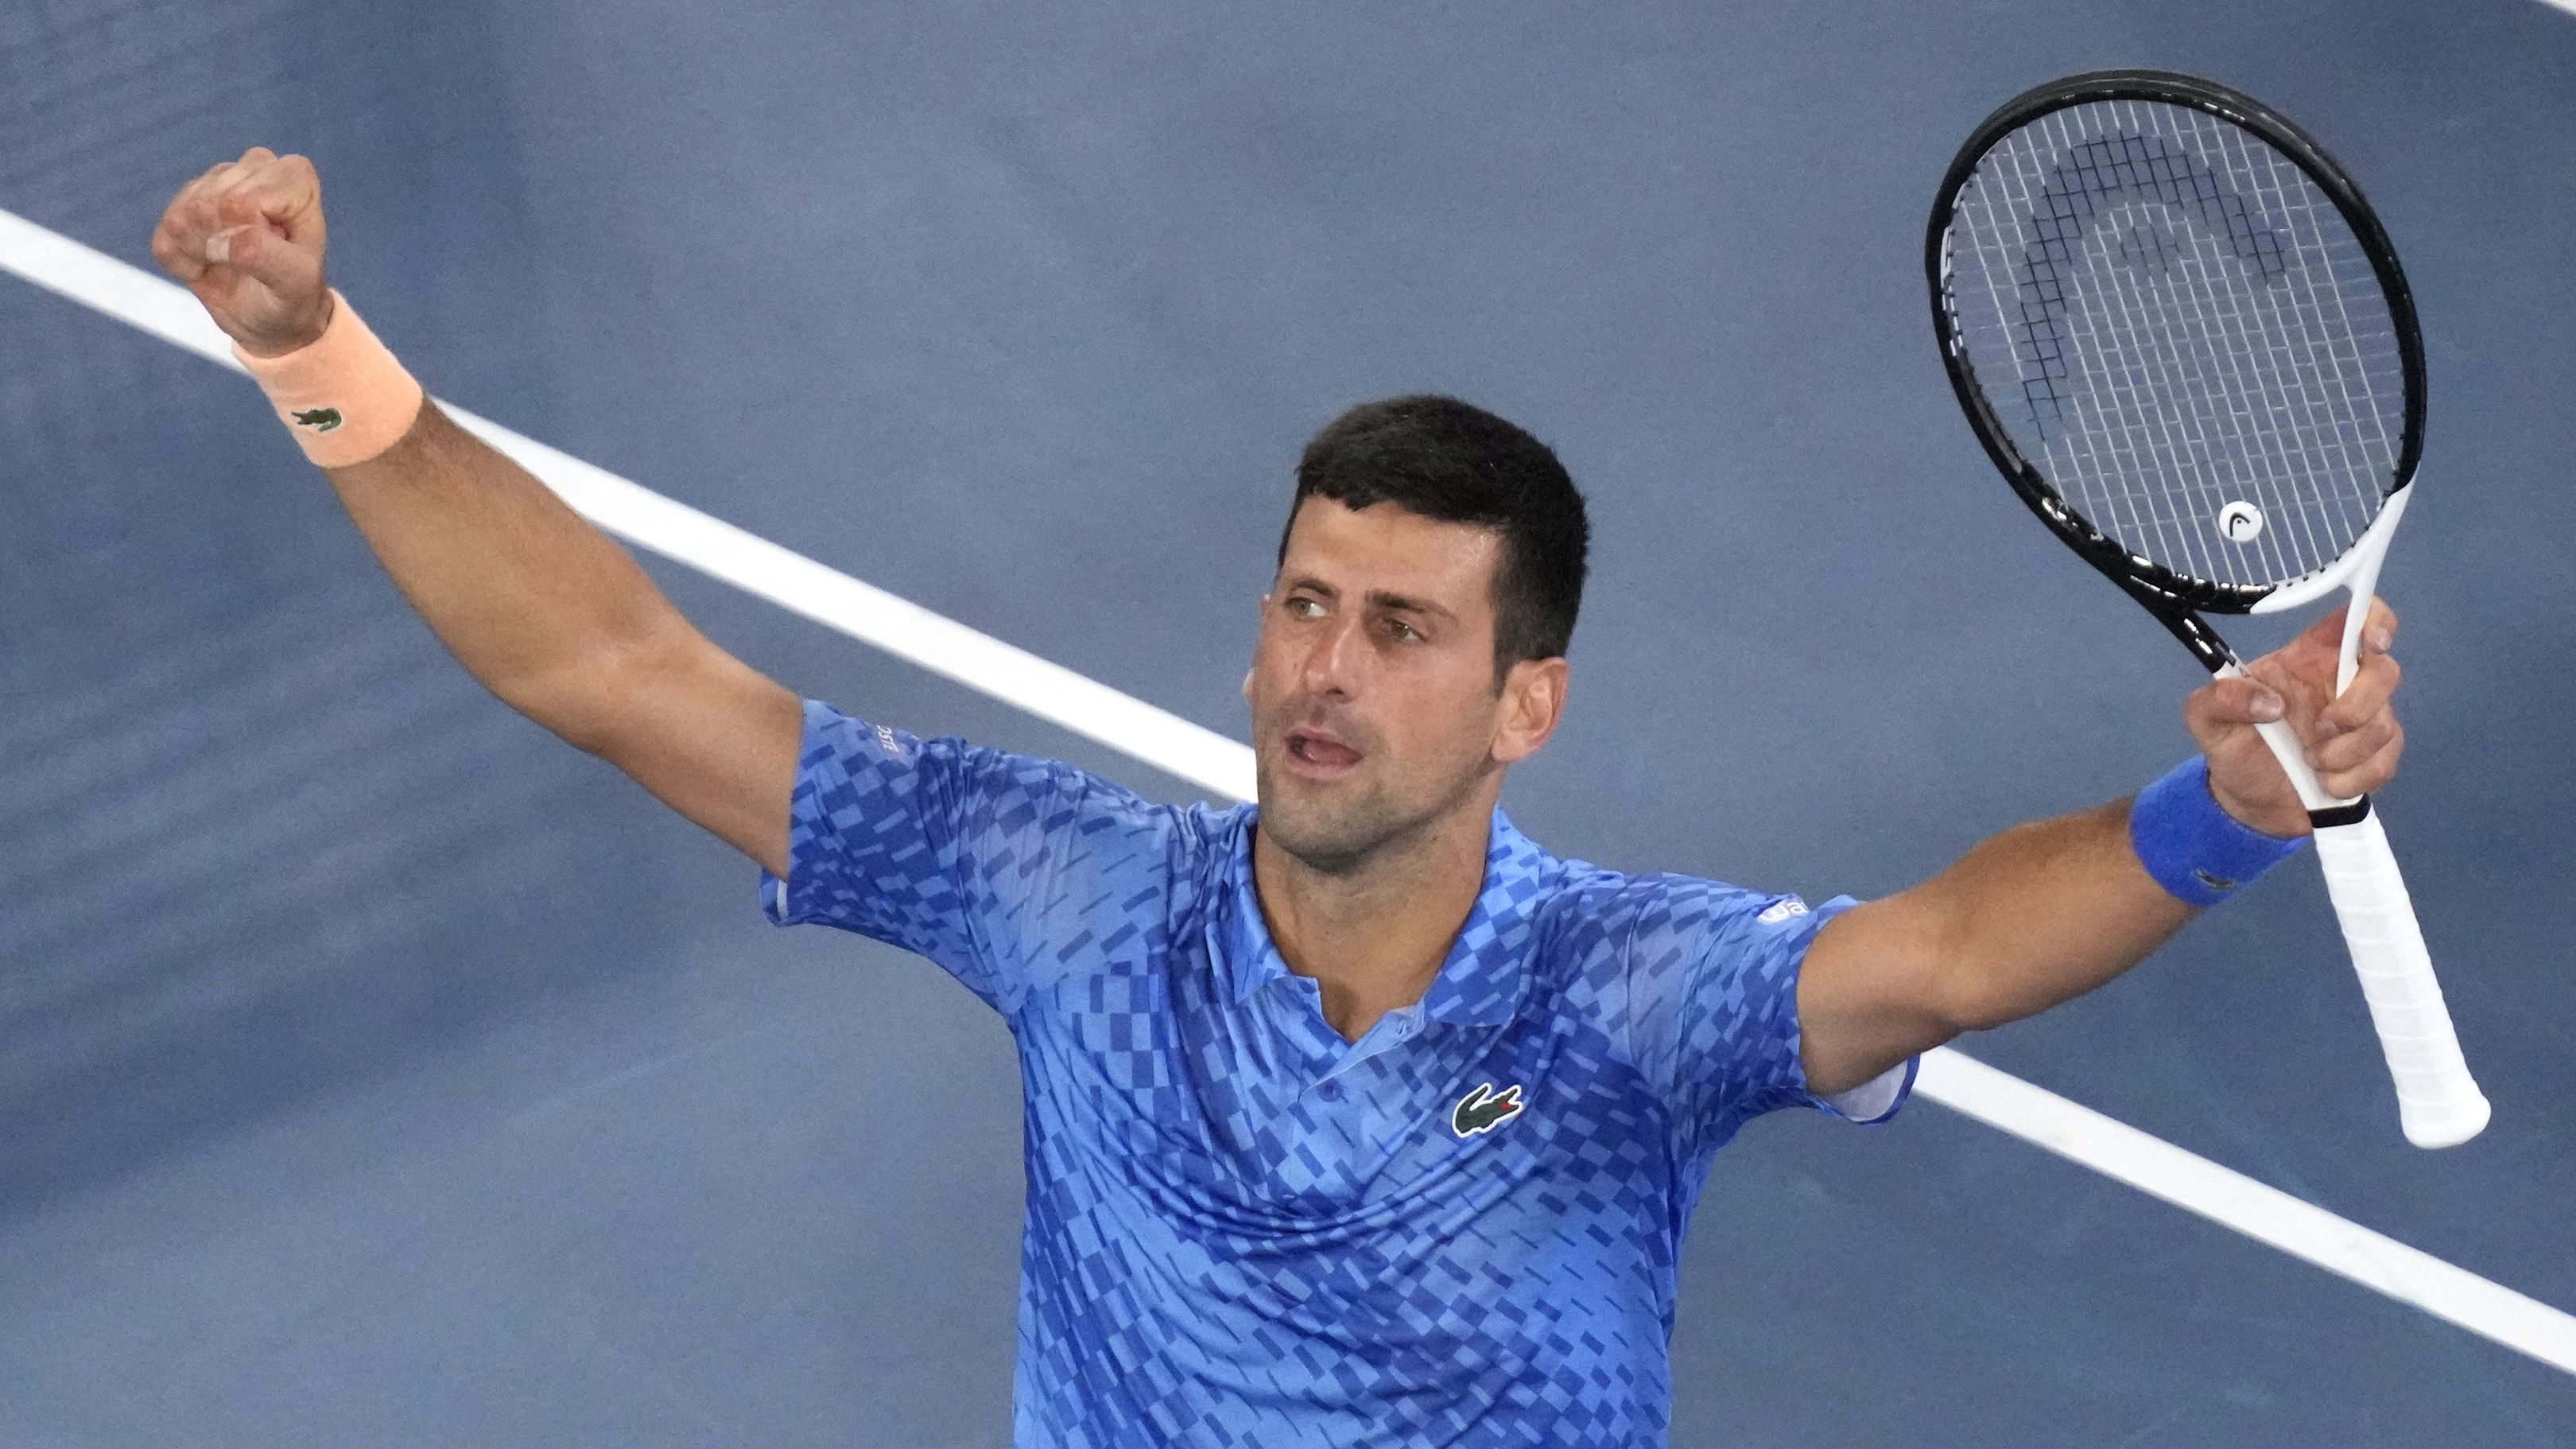 Novak Djokovic reacts after defeating Grigor Dimitrov in their third round clash at Rod Laver Arena.